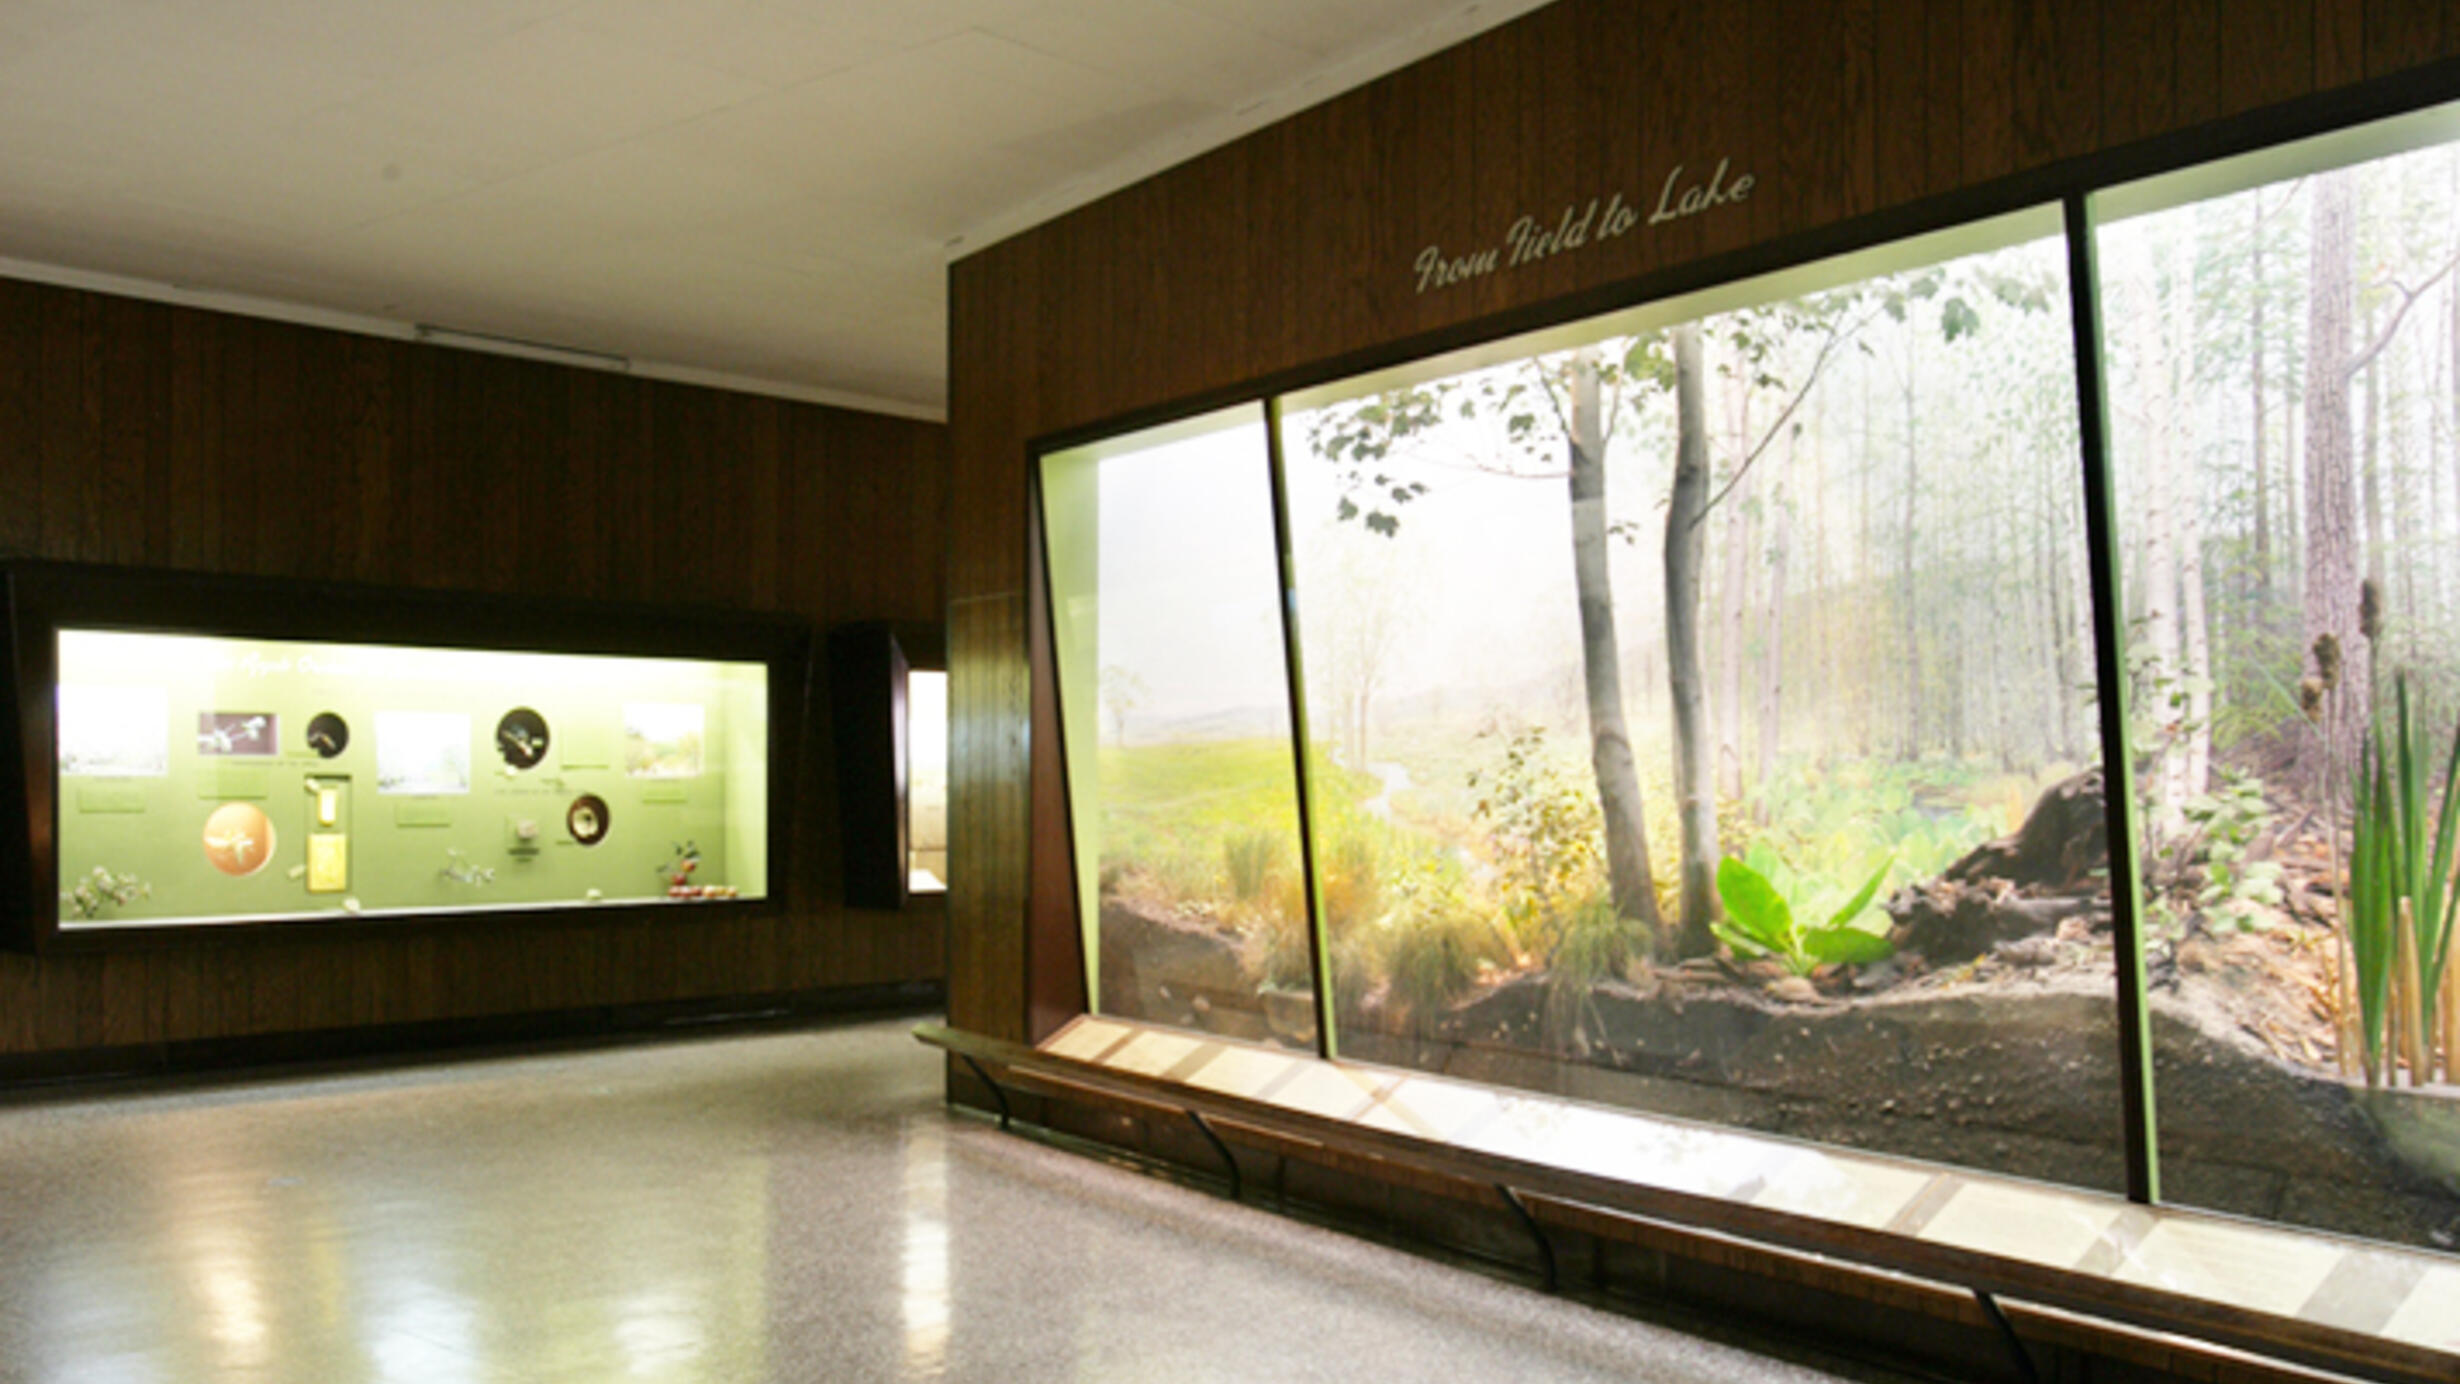 A diorama in the Hall of New York State Environment shows soil, plants, and tree species.